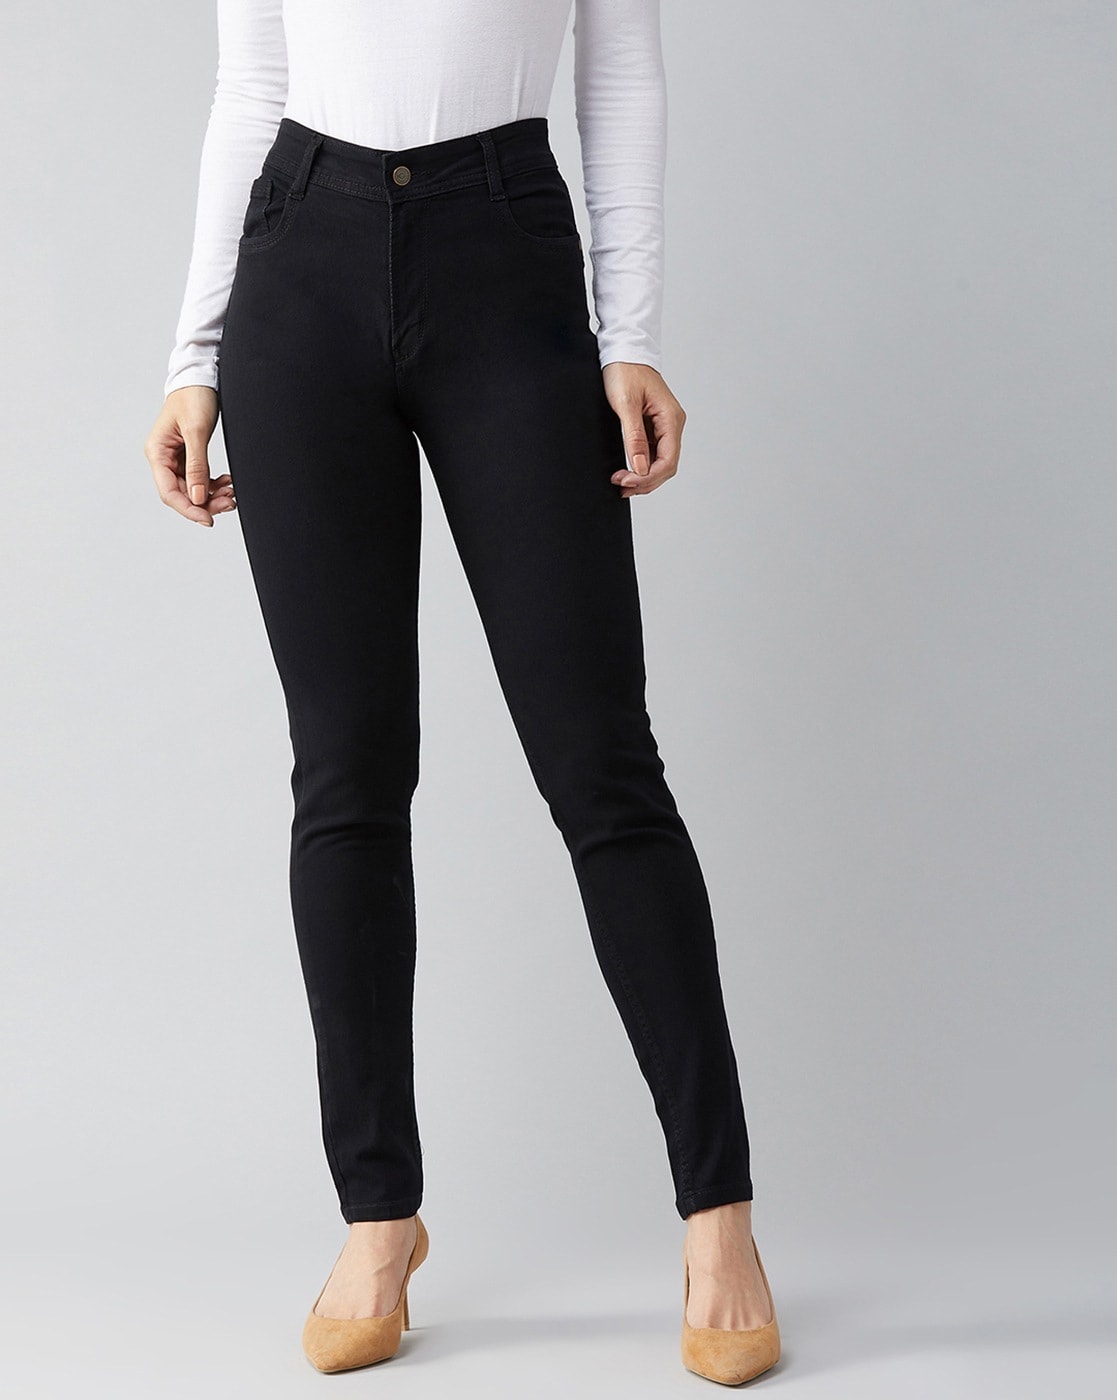 Black Washed High Waist Ashleigh Skinny Jeans | New Look